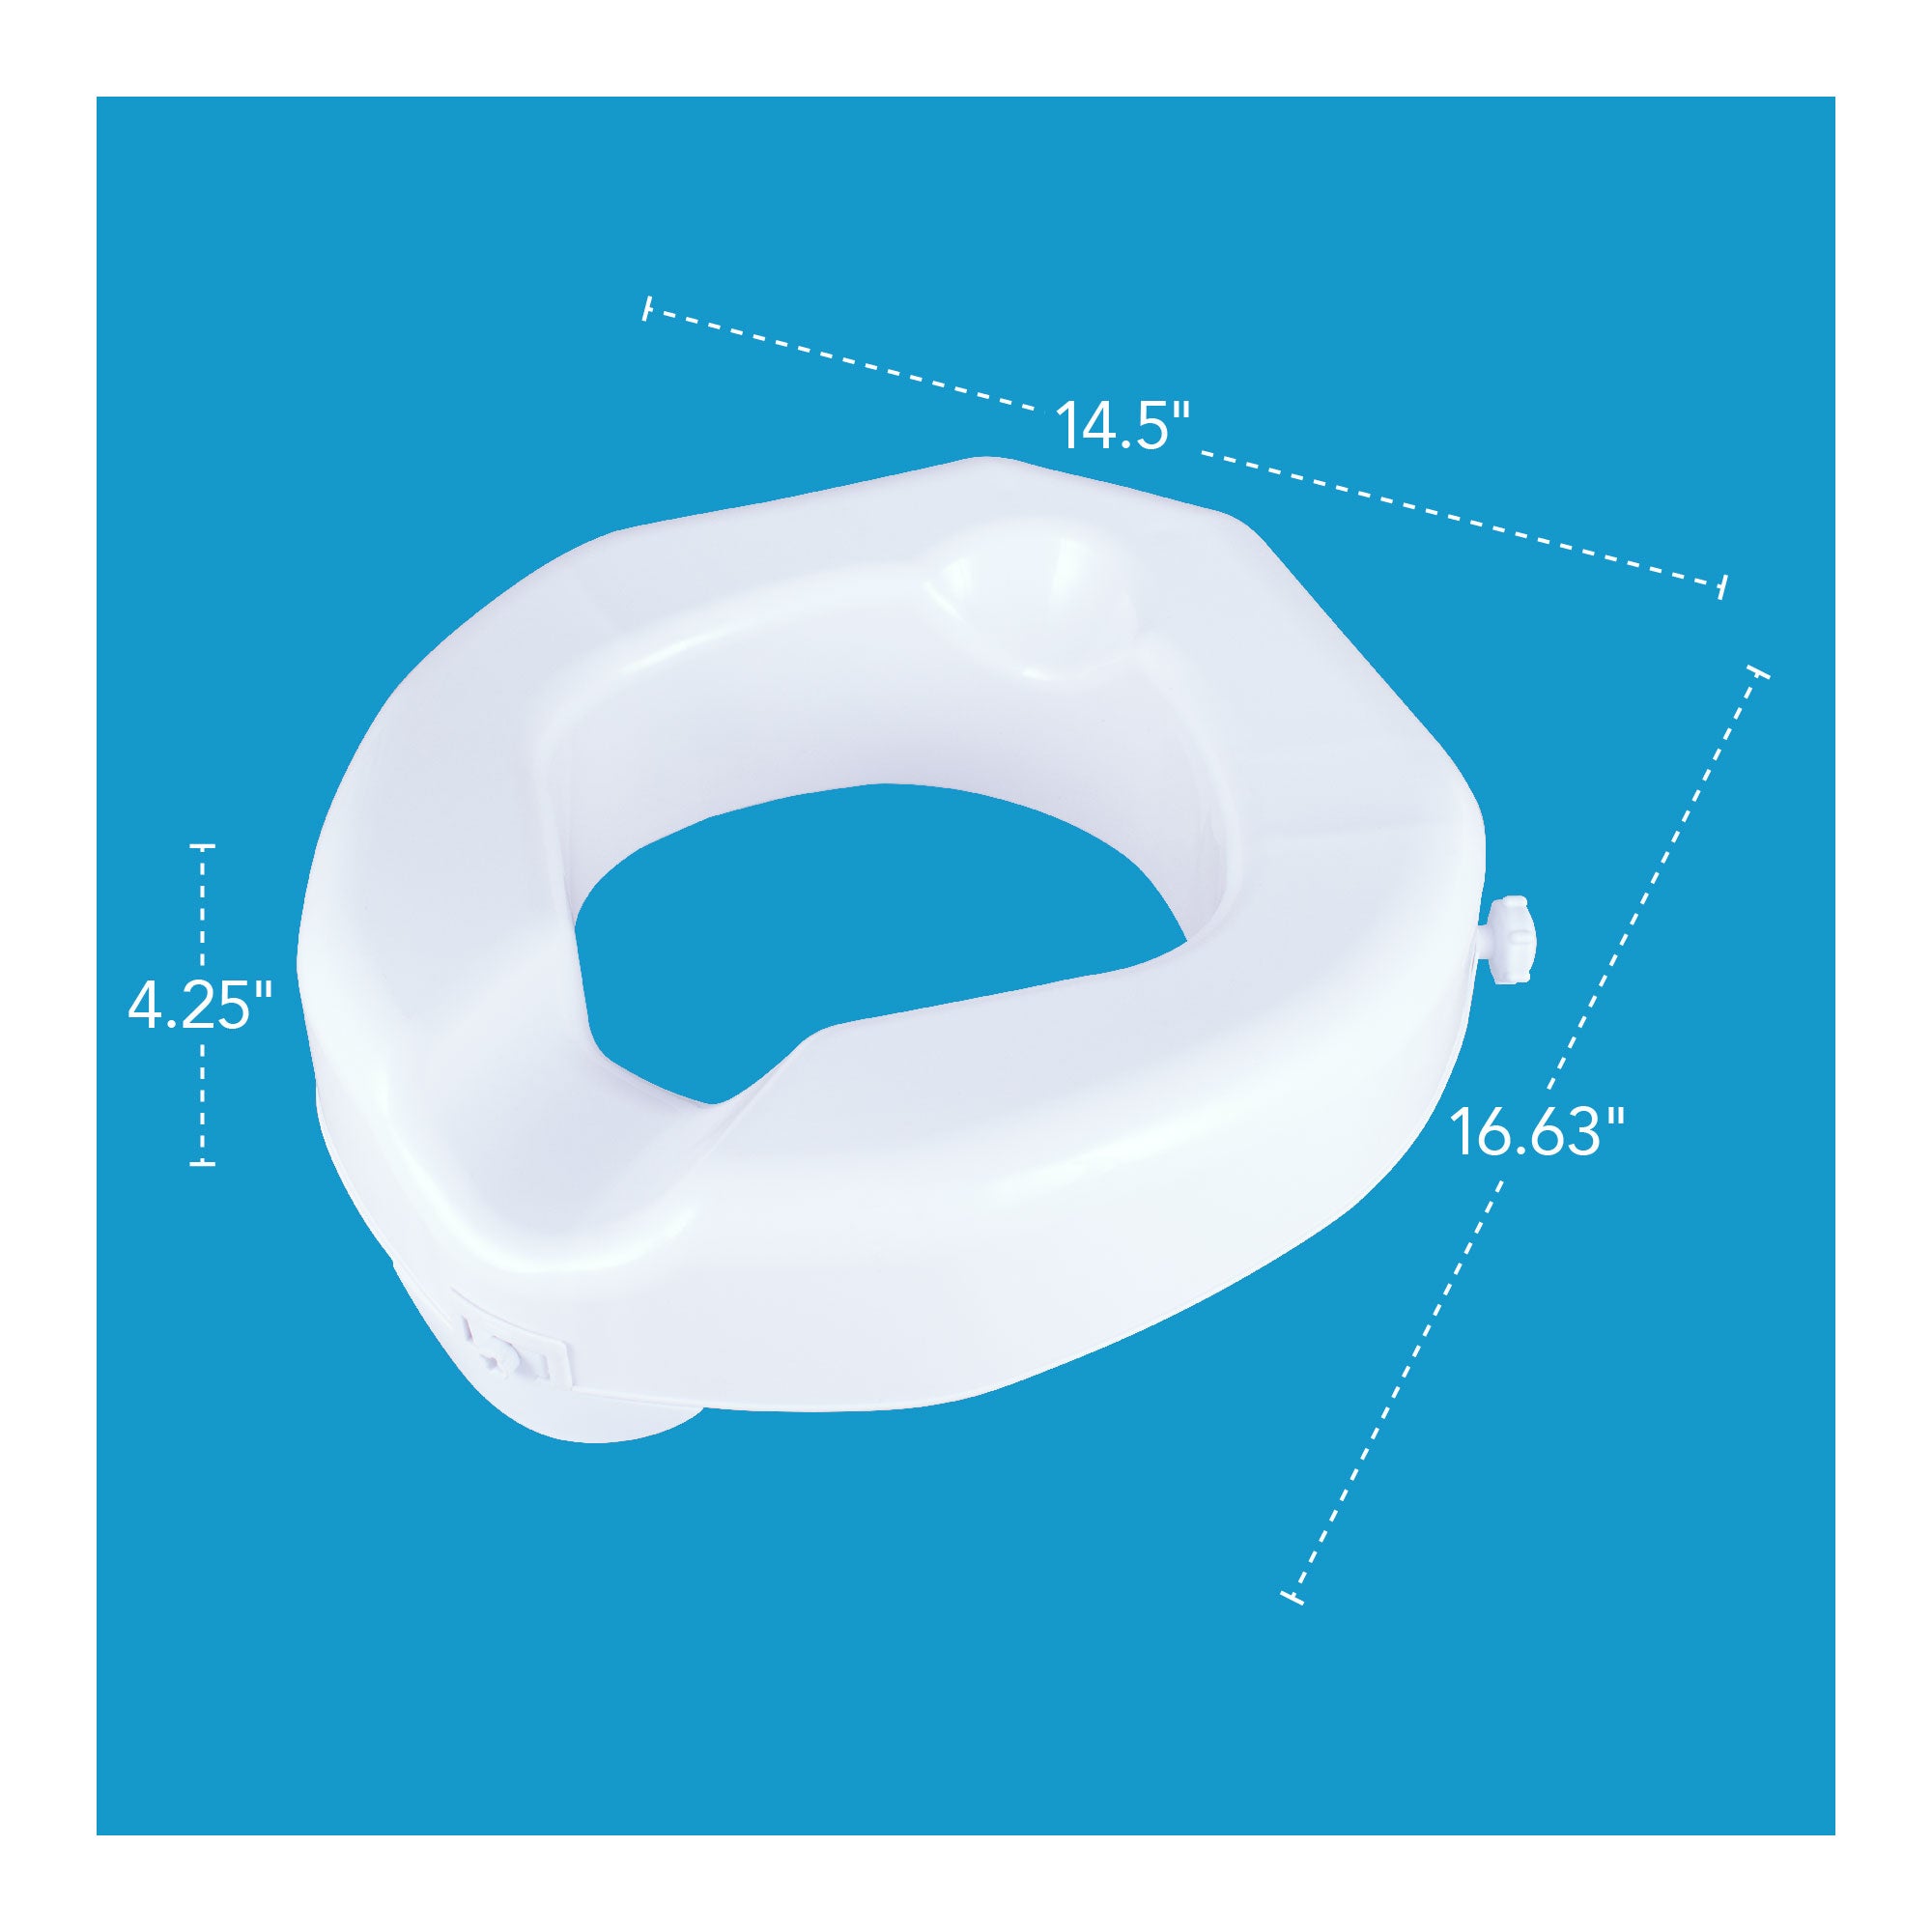 A bariatric raised toilet seat's dimensions outlined